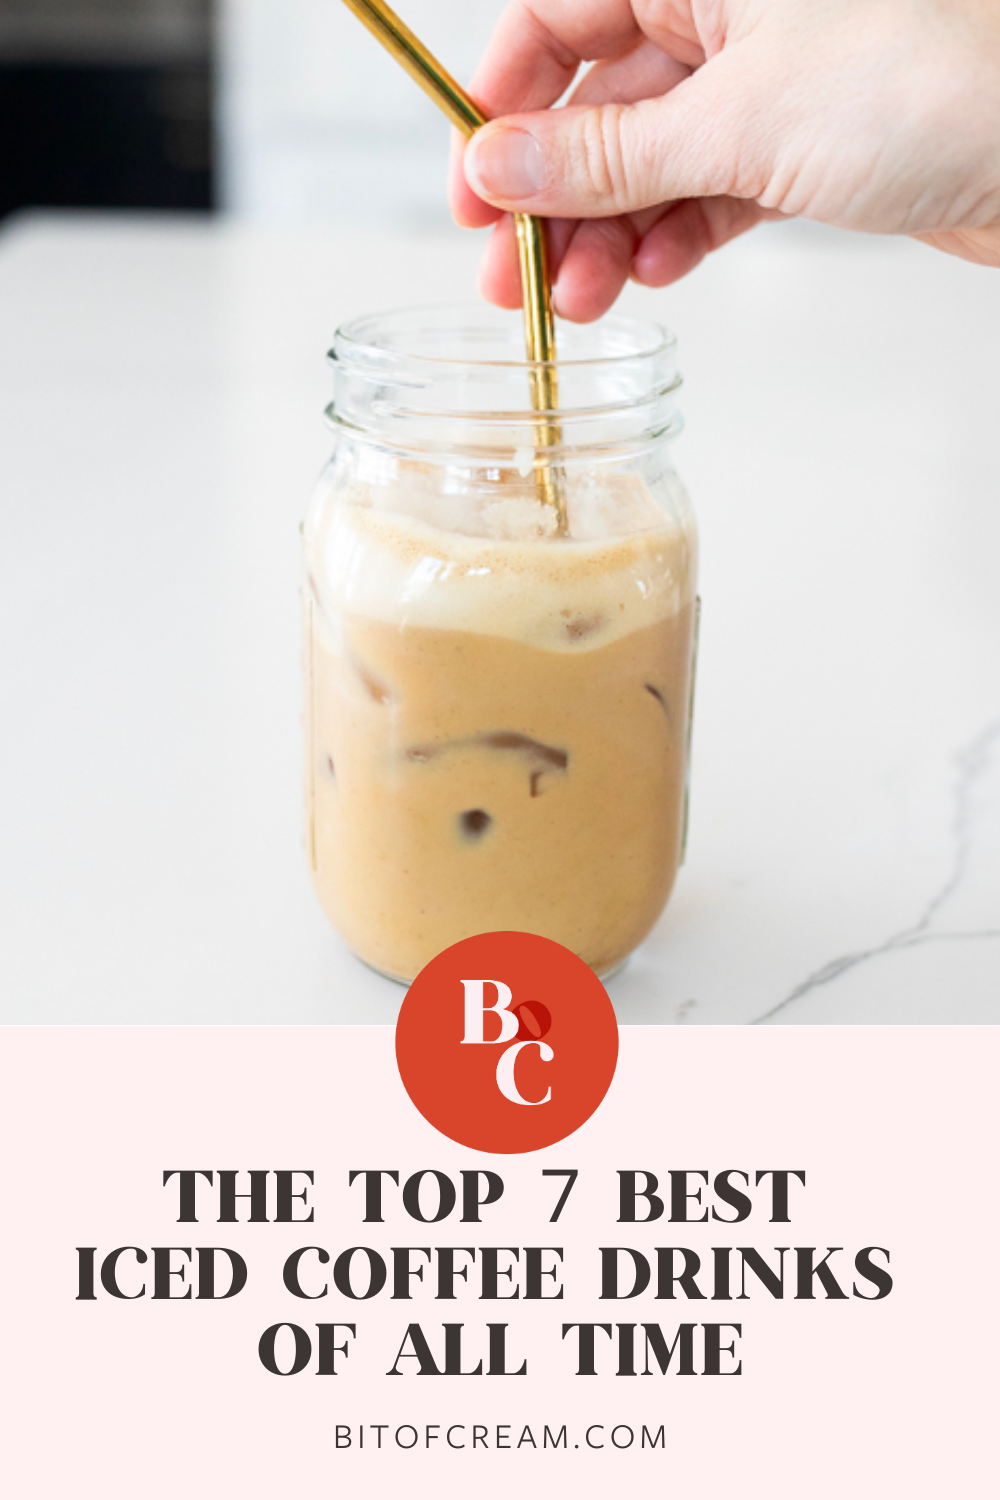 The Top 7 Best Iced Coffee Drinks of All Time